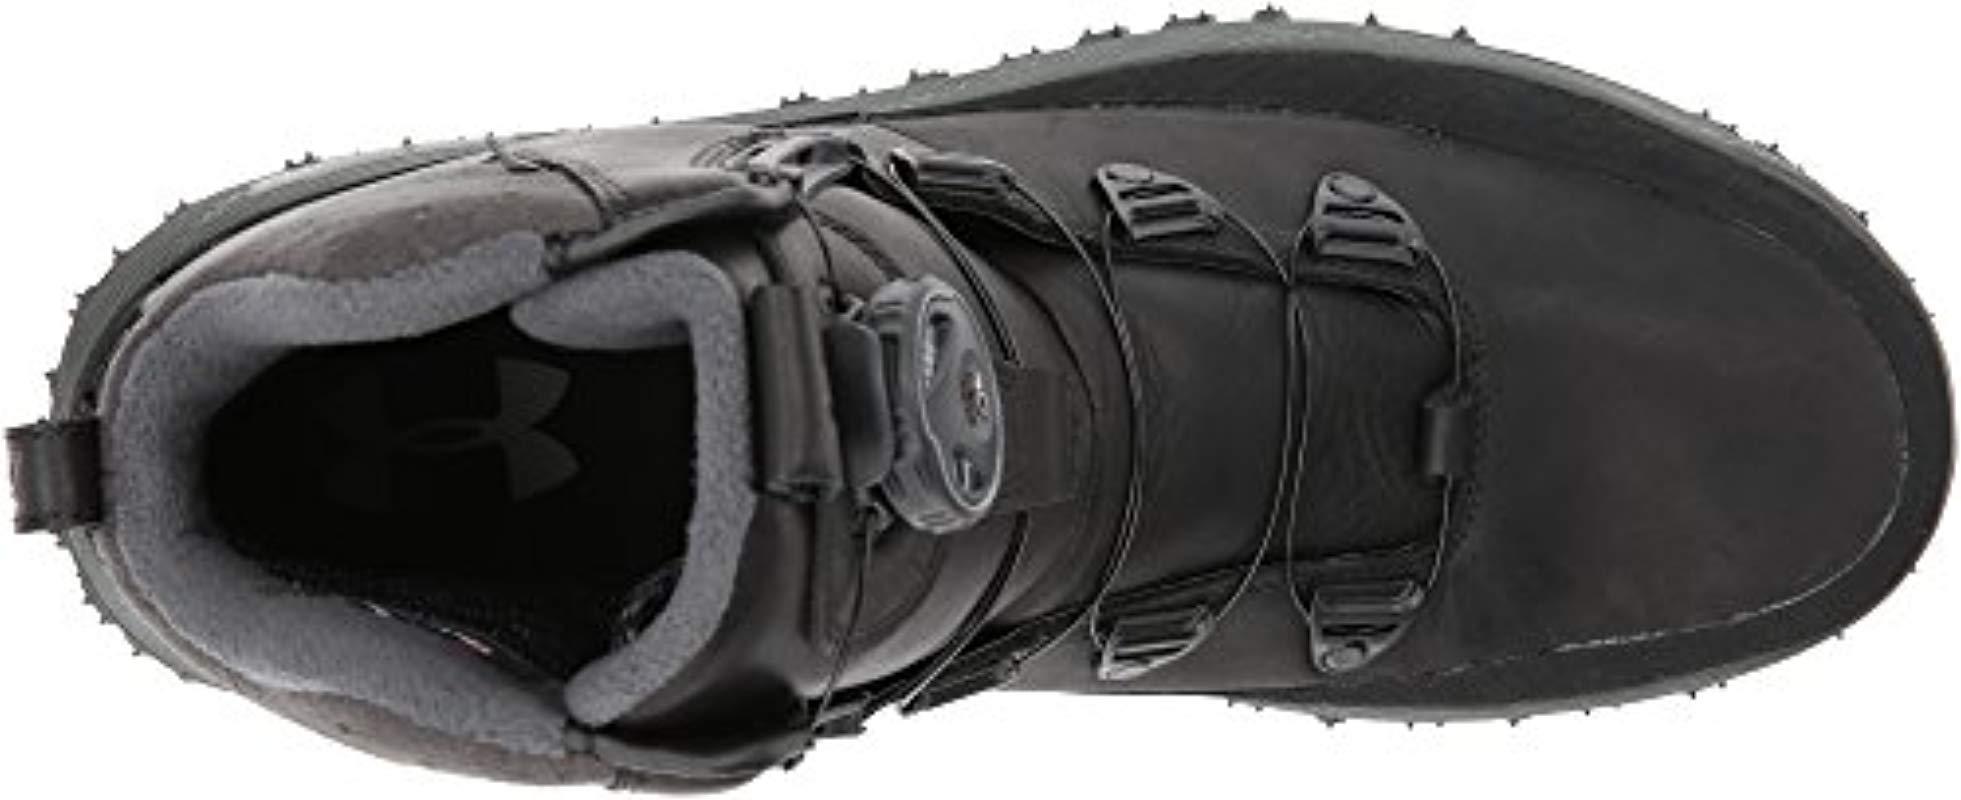 Under Armour Leather Fat Tire Govie Boa Hiking Boot in Black for Men - Lyst